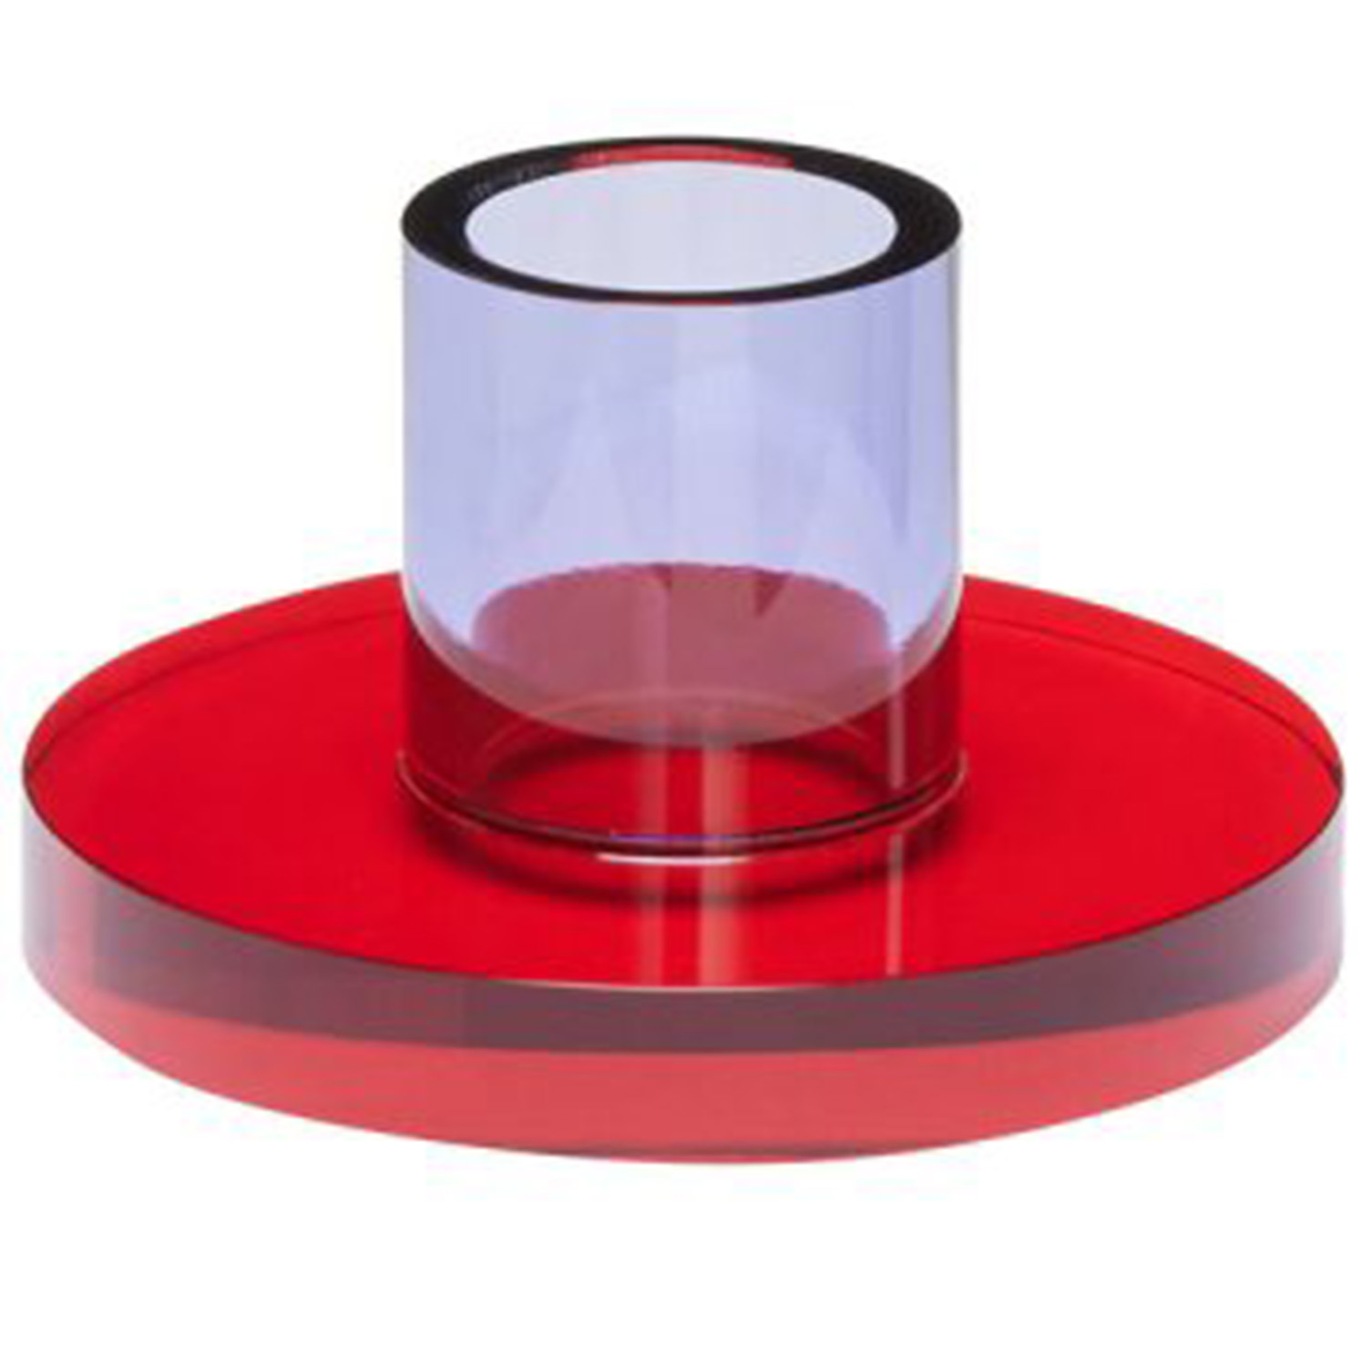 Astra Candlestick, Red/Purple